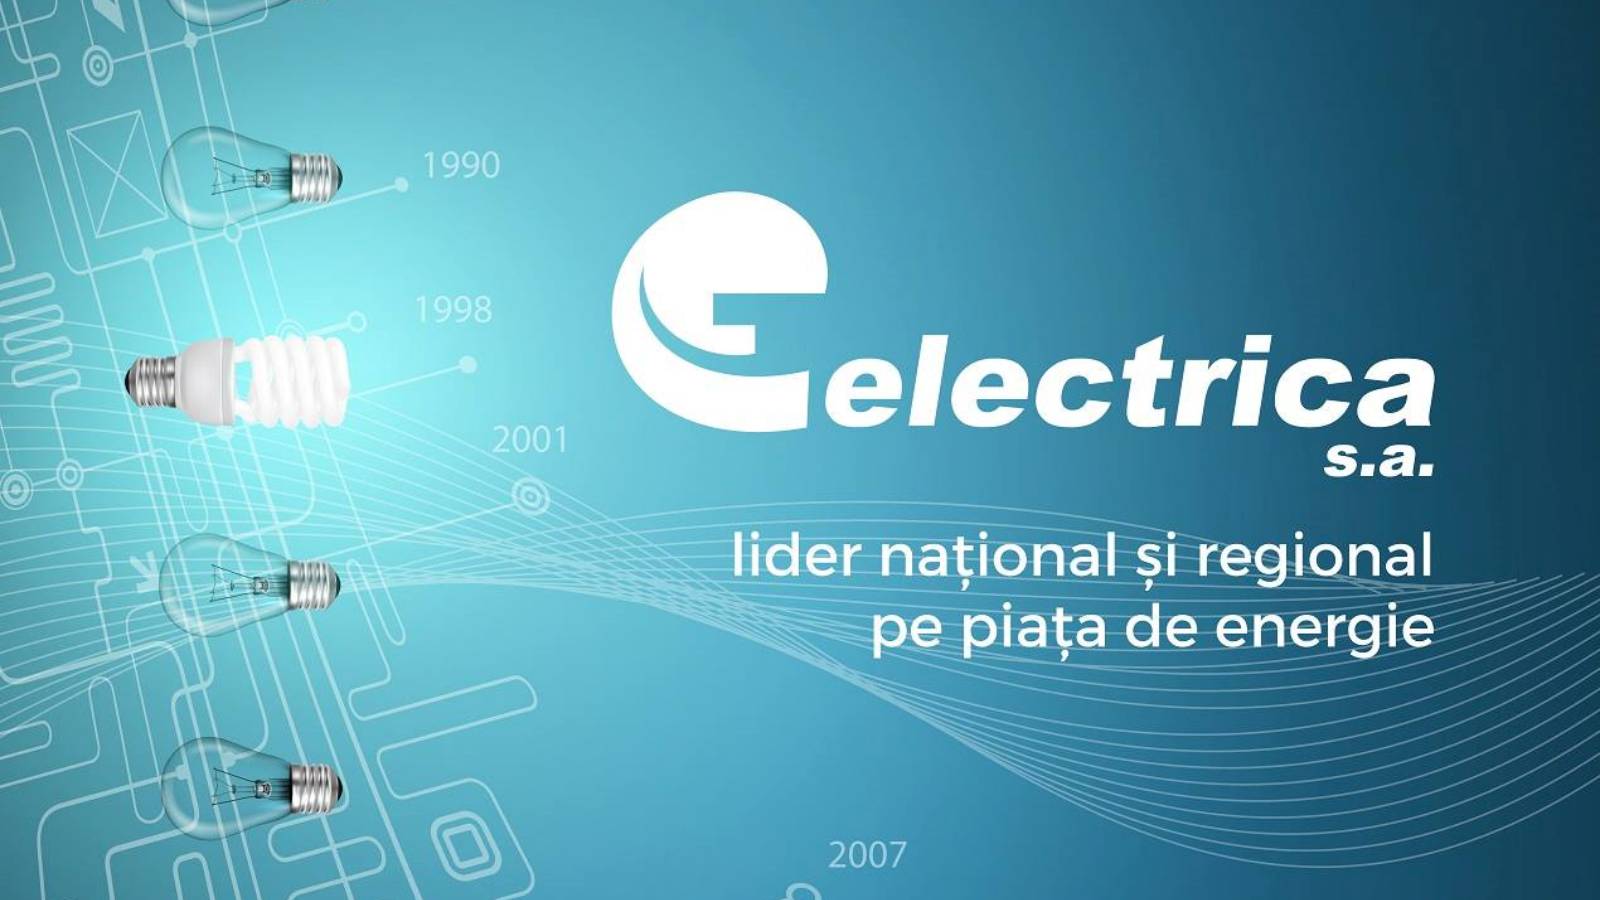 Electrica Informatii Formale ULTIM MOMENT PROBLEMELE Resimtite Clientii Romani